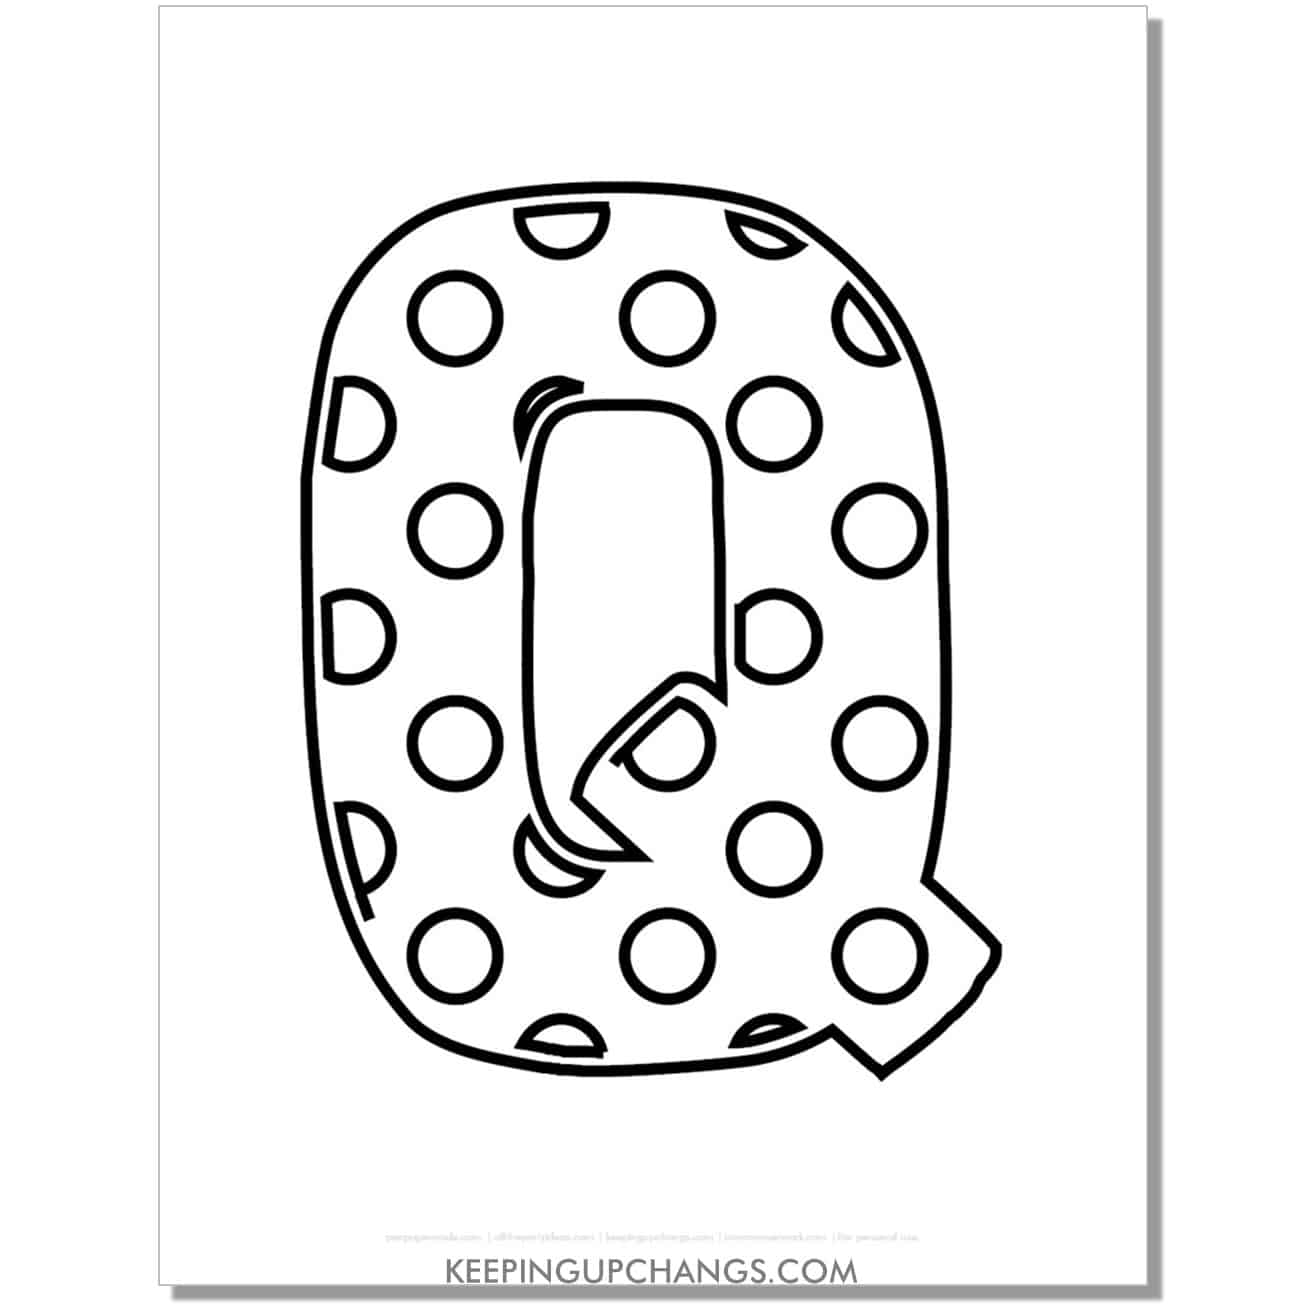 free alphabet letter q coloring page with polka dots for toddlers, preschool, kindergarten.